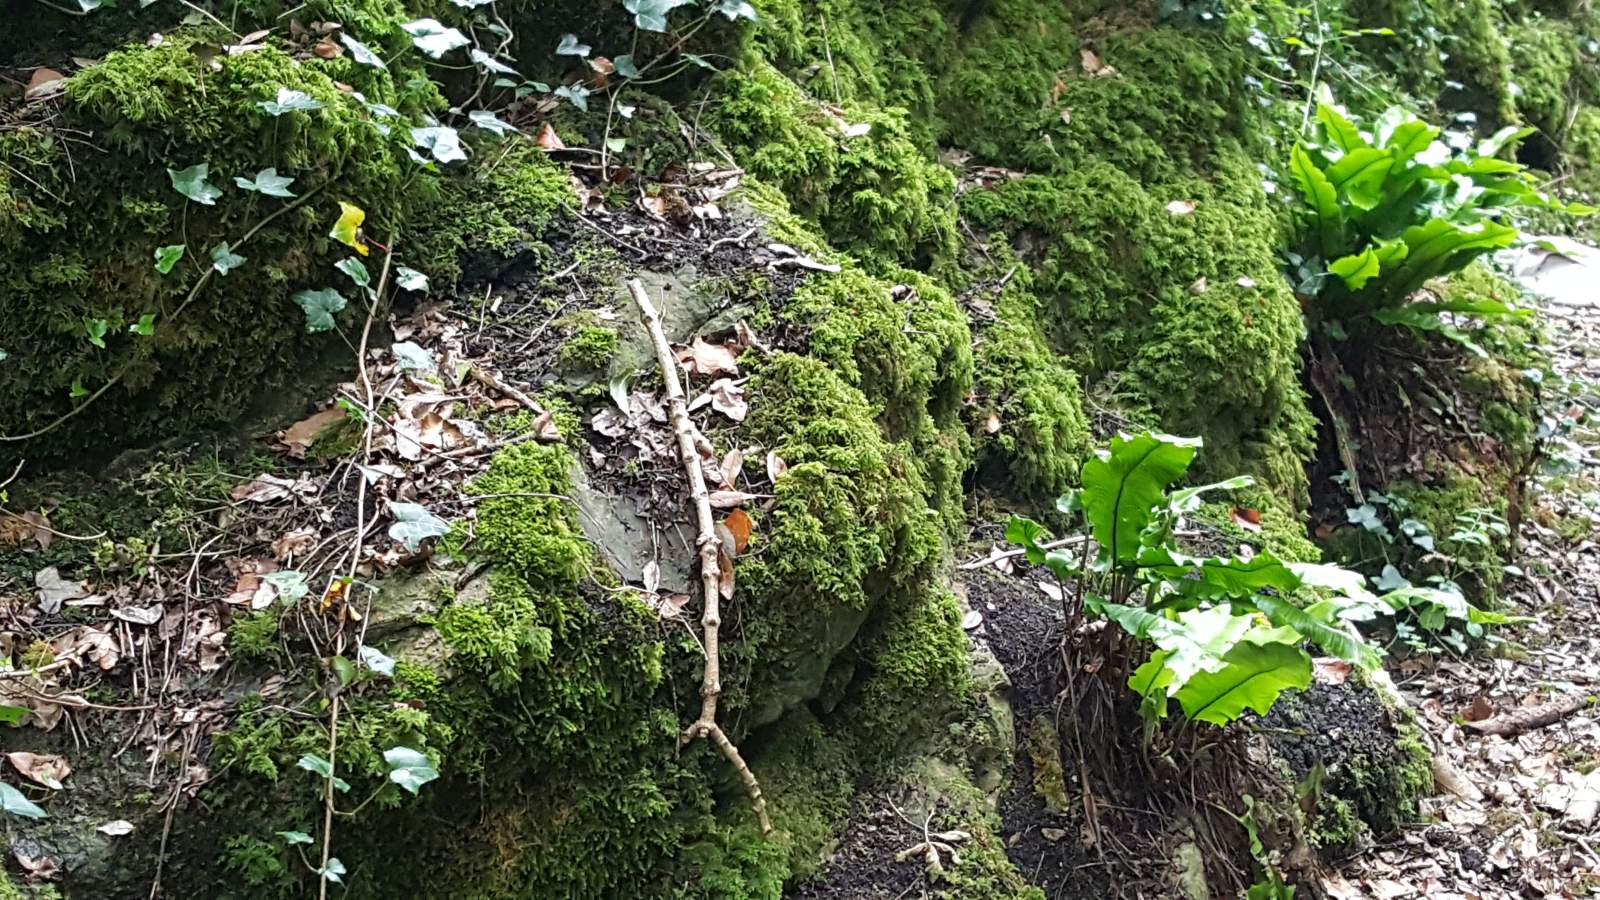 All green! Ivy, various kinds of moss and ferns growing in luscious profusion on a limestone rockface